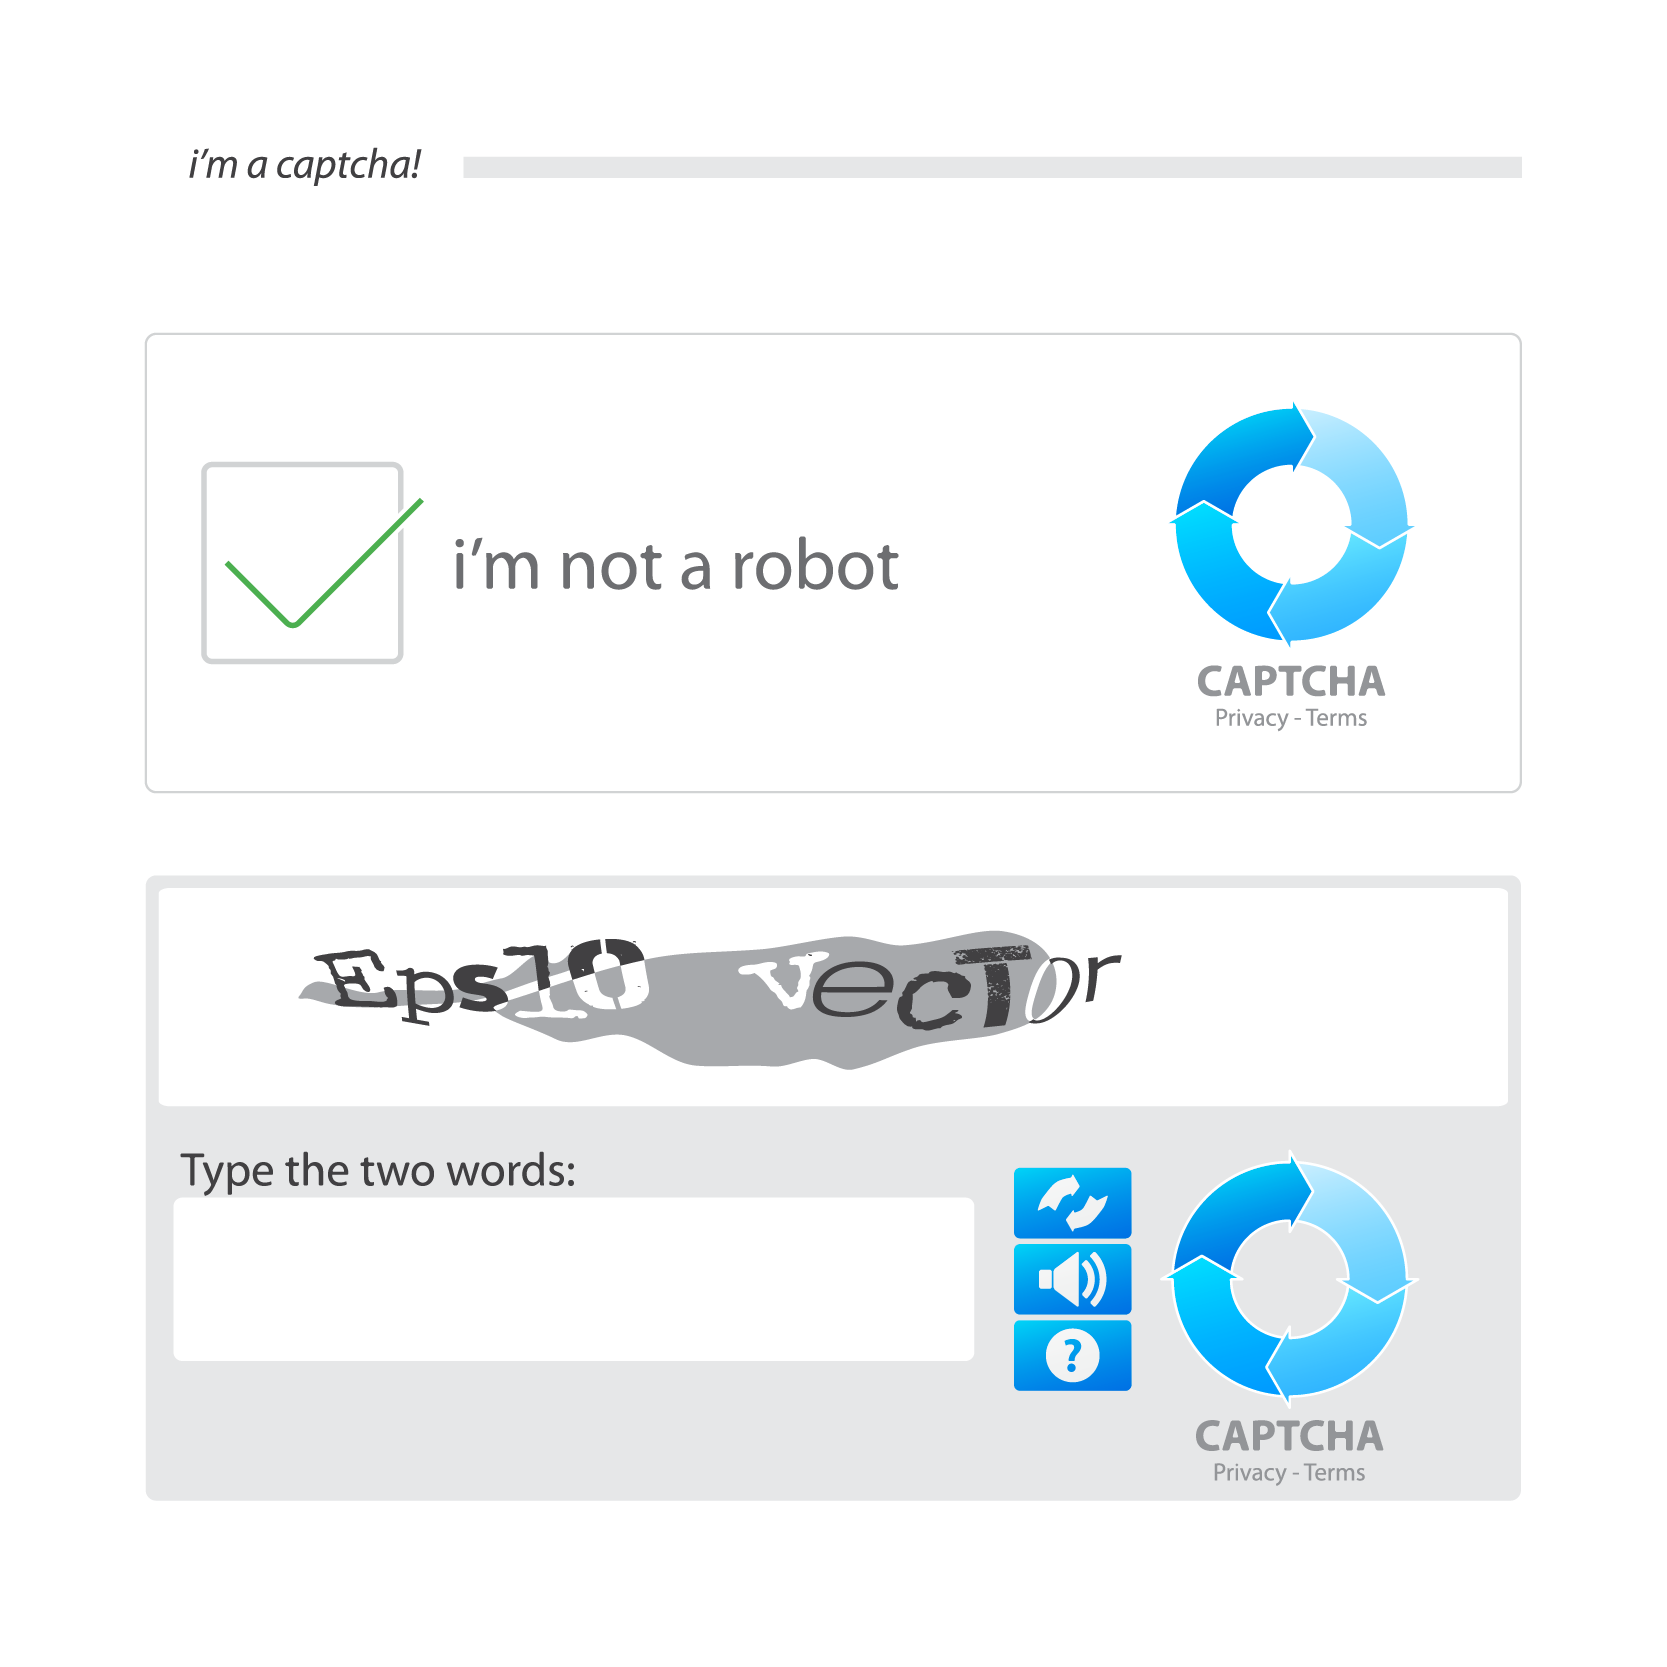 Image of a captcha that has a green check mark next to text that says i'm not a robot. Underneath it is a series of jumbles letters and numbers that are difficult to decode with an empty text box